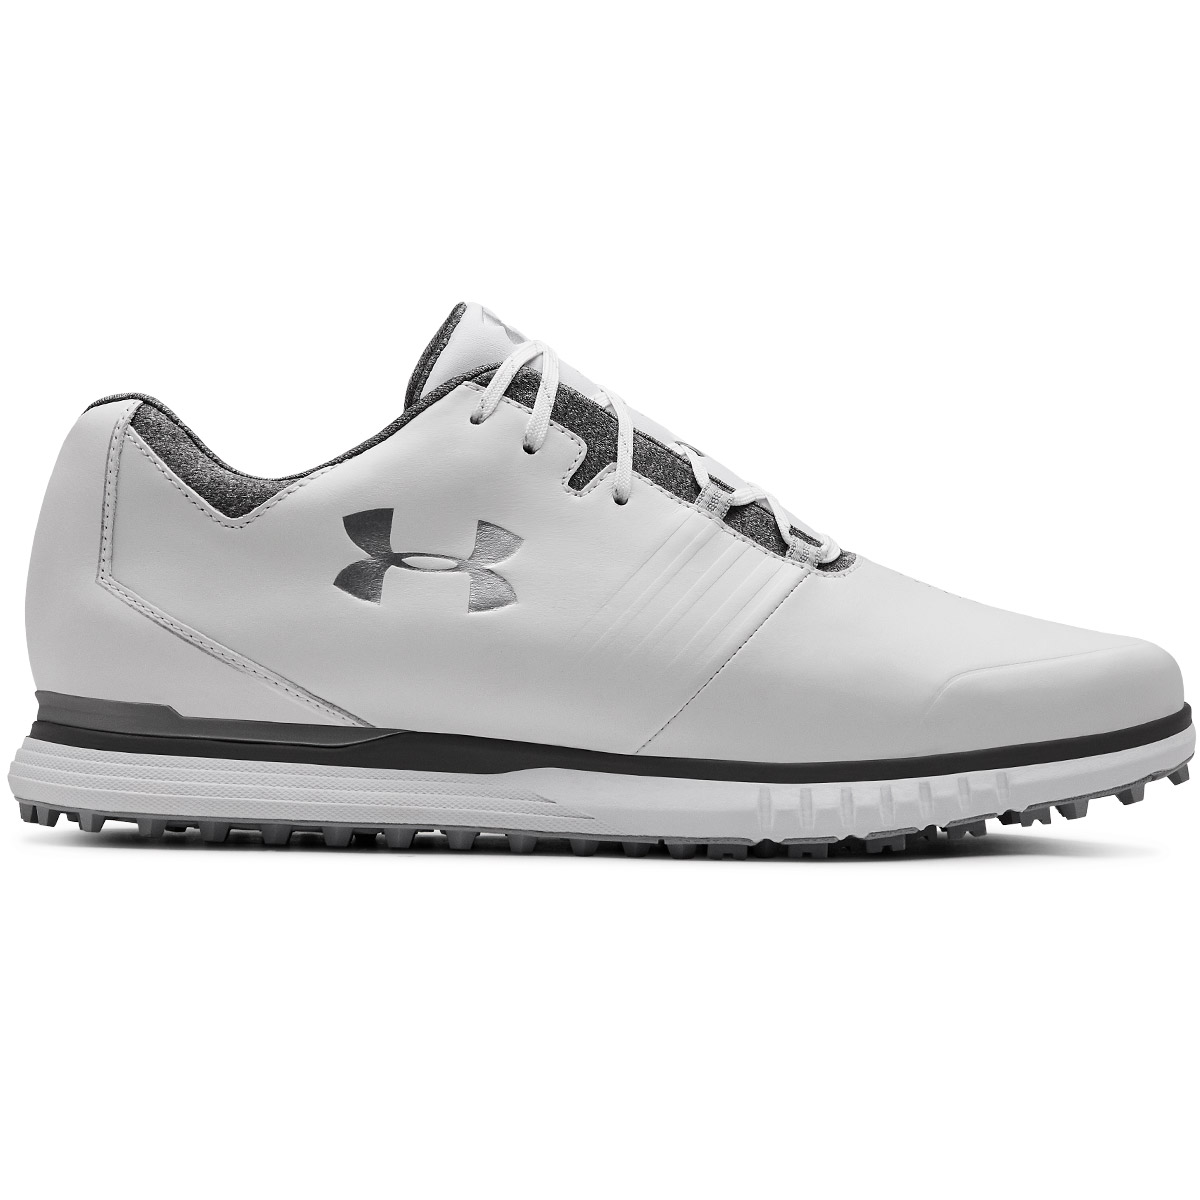 under armour sl golf shoes